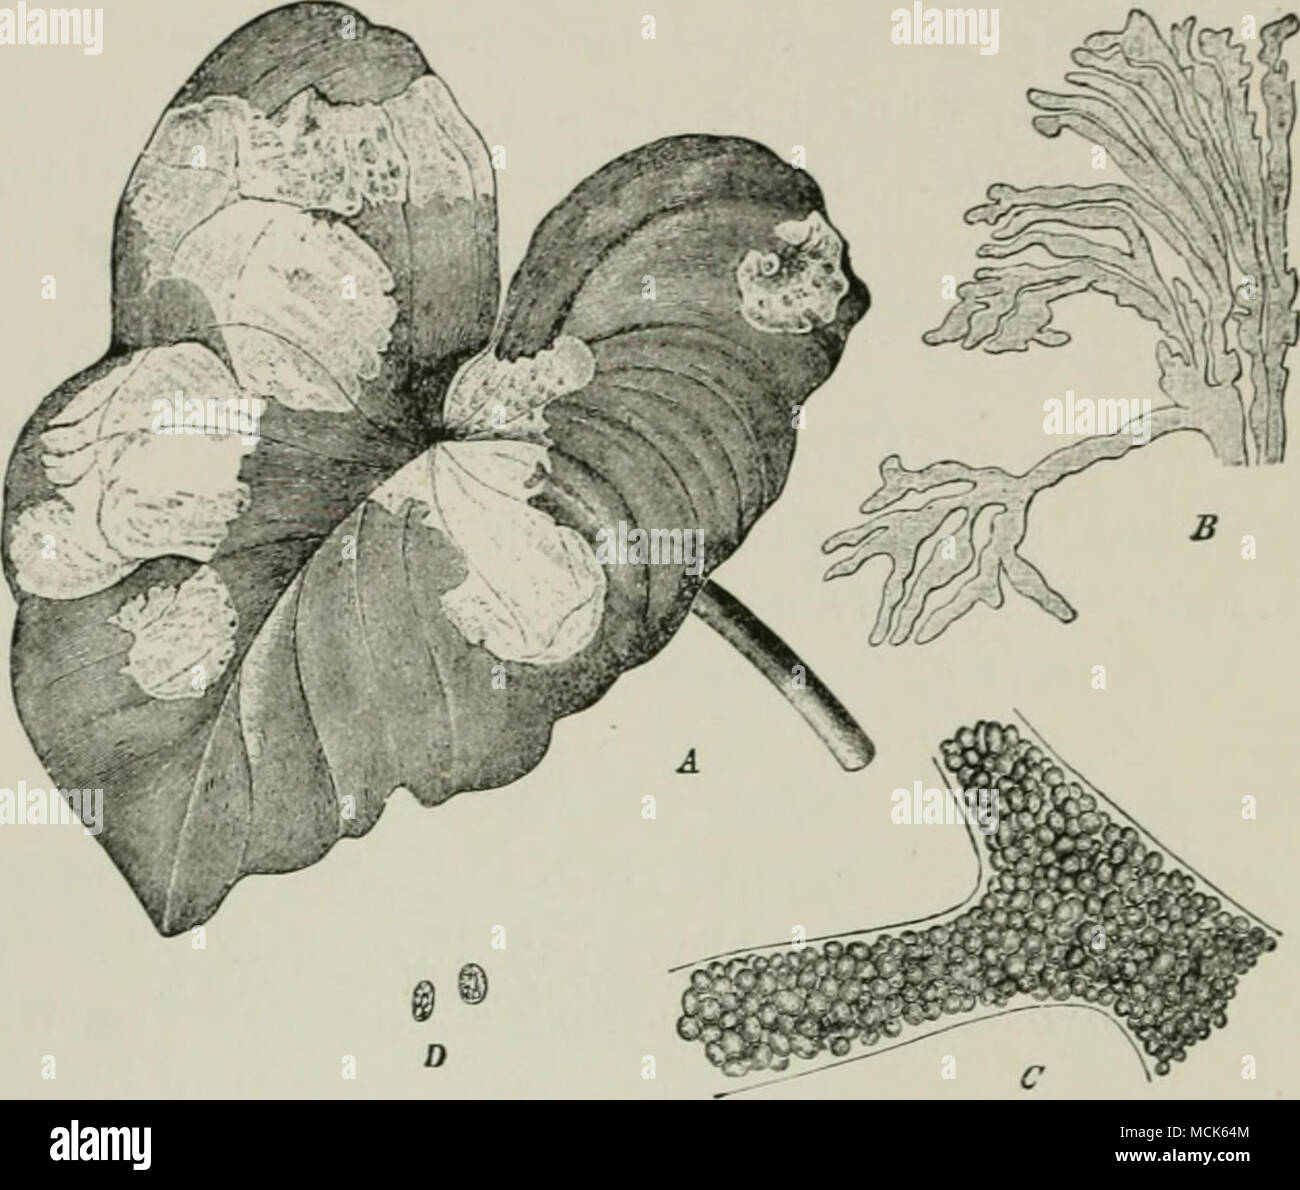 . Fio. 330.—Phyllosiphon arisari on Ariso-ruui vulgare. A, Leaf with yellowish s{)ot.s ; S, the branched alga isolated from a spot; C, spore-formation in.side a filament; 0, spores. (After Just and Engler-Prantl.) single leaf may bear a large number of spots, and all the plants of a locality are generally attacked. The spots were found by Just only from December to April, then they disappeared, indicating that the algal spores must have a resting-period outside of the Arisarum, and return to young plants again in autumn. Phytaphysa Treubii Weber et v. Bosse. Forms characteristic galls on a spe Stock Photo